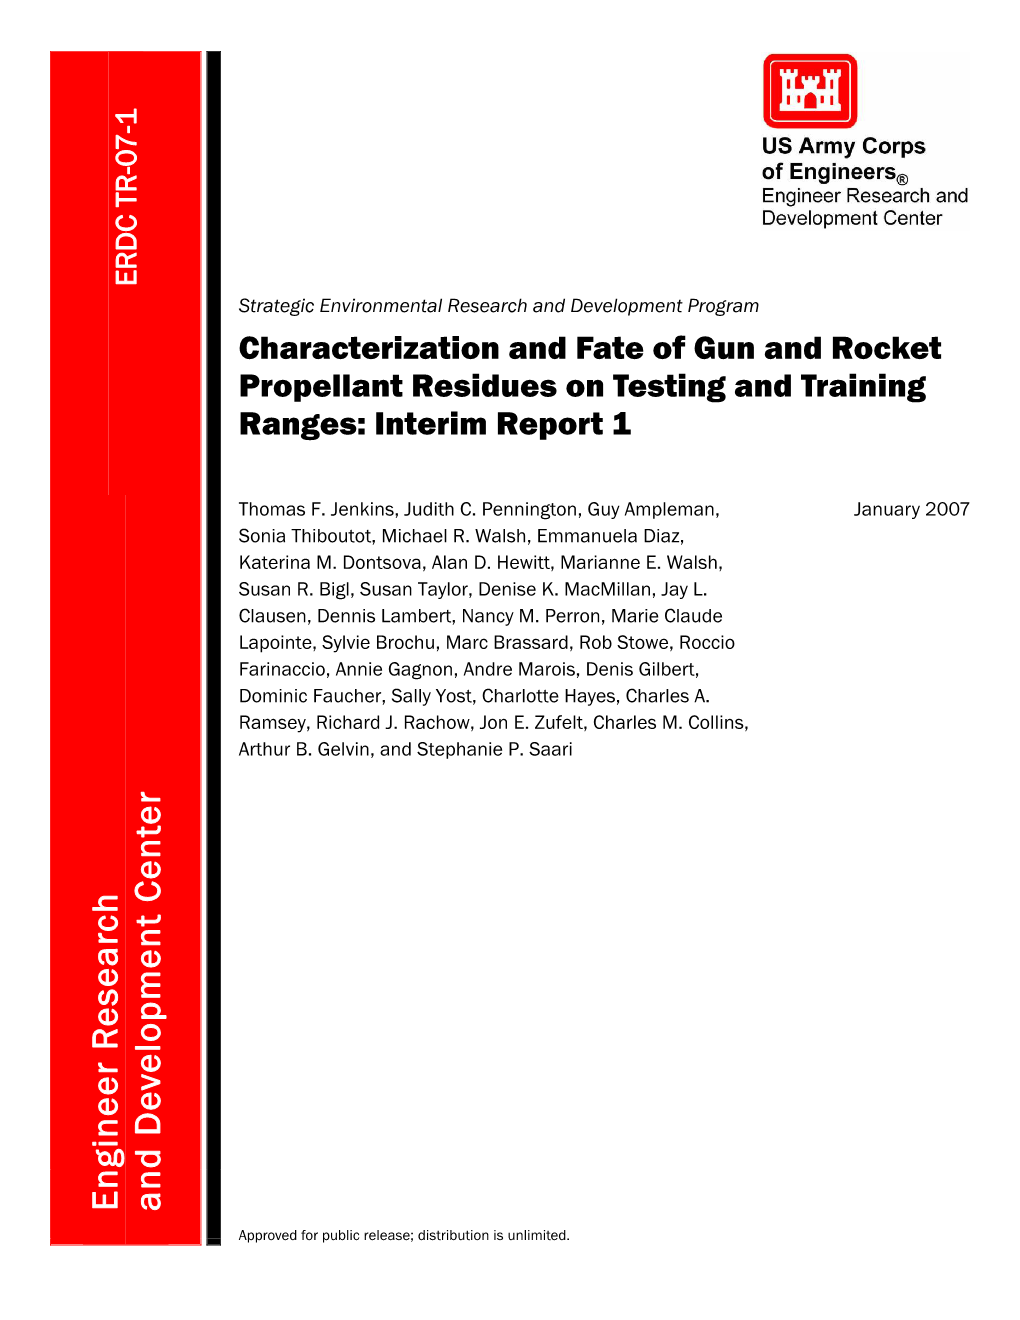 ERDC TR-07-1, Characterization and Fate of Gun and Rocket Propellant